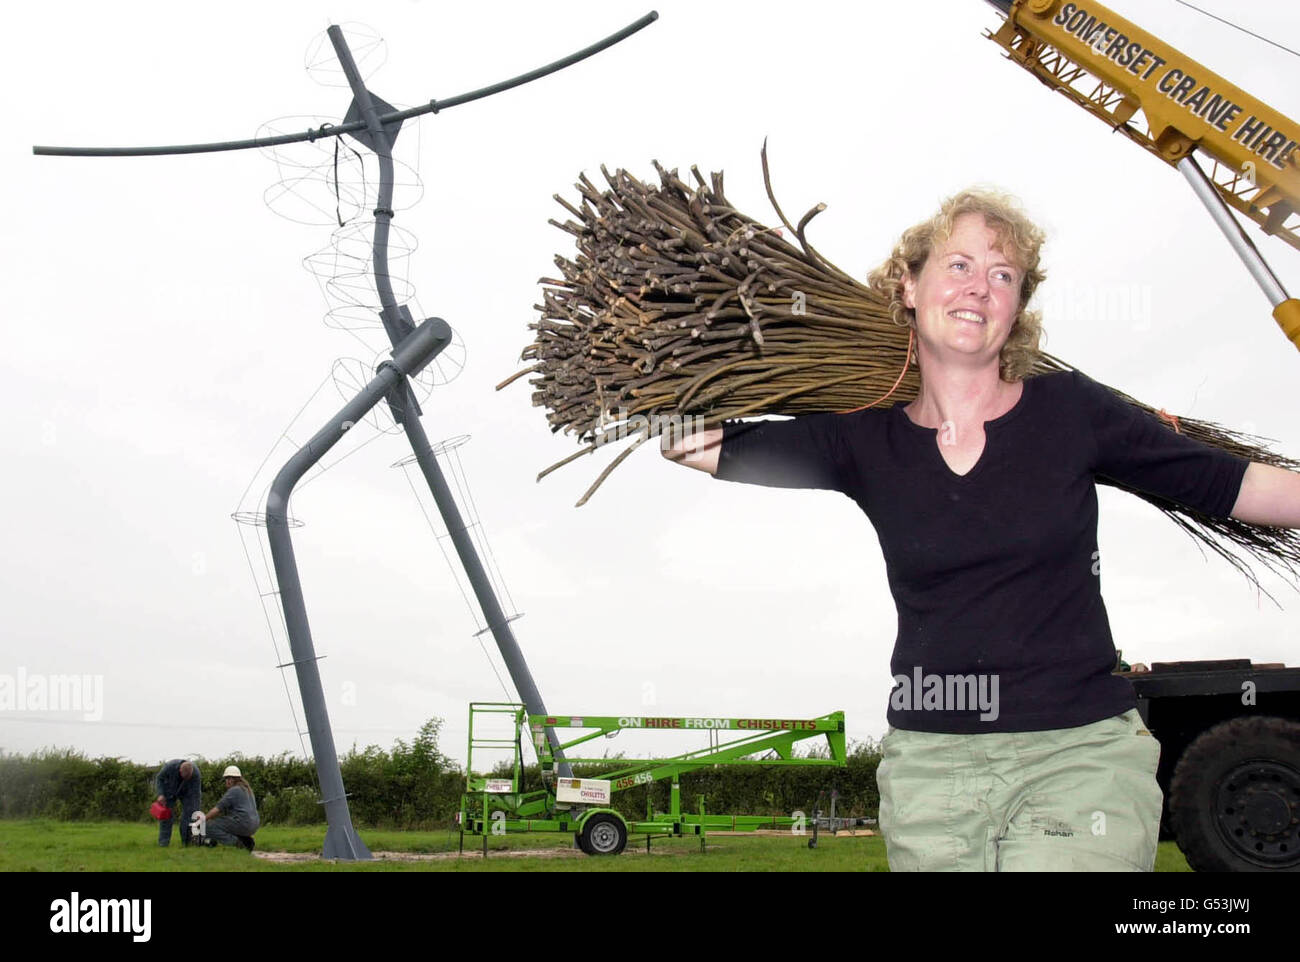 Artist Serena de la Hey stands in front of her framework for a huge willow sculpture, dubbed the Colossus of the West next to the M5 motorway. The giant sculpture of a running figure was put up as part of the Year of the Artist in the South West. * ...and can be seen from the M5 near Bridgwater, Somerset, and from the nearby railway line. Local artist Serena will now complete the sculpture, which has been compared to the Angel of the North, by weaving locally grown willow around the metal framework. Stock Photo